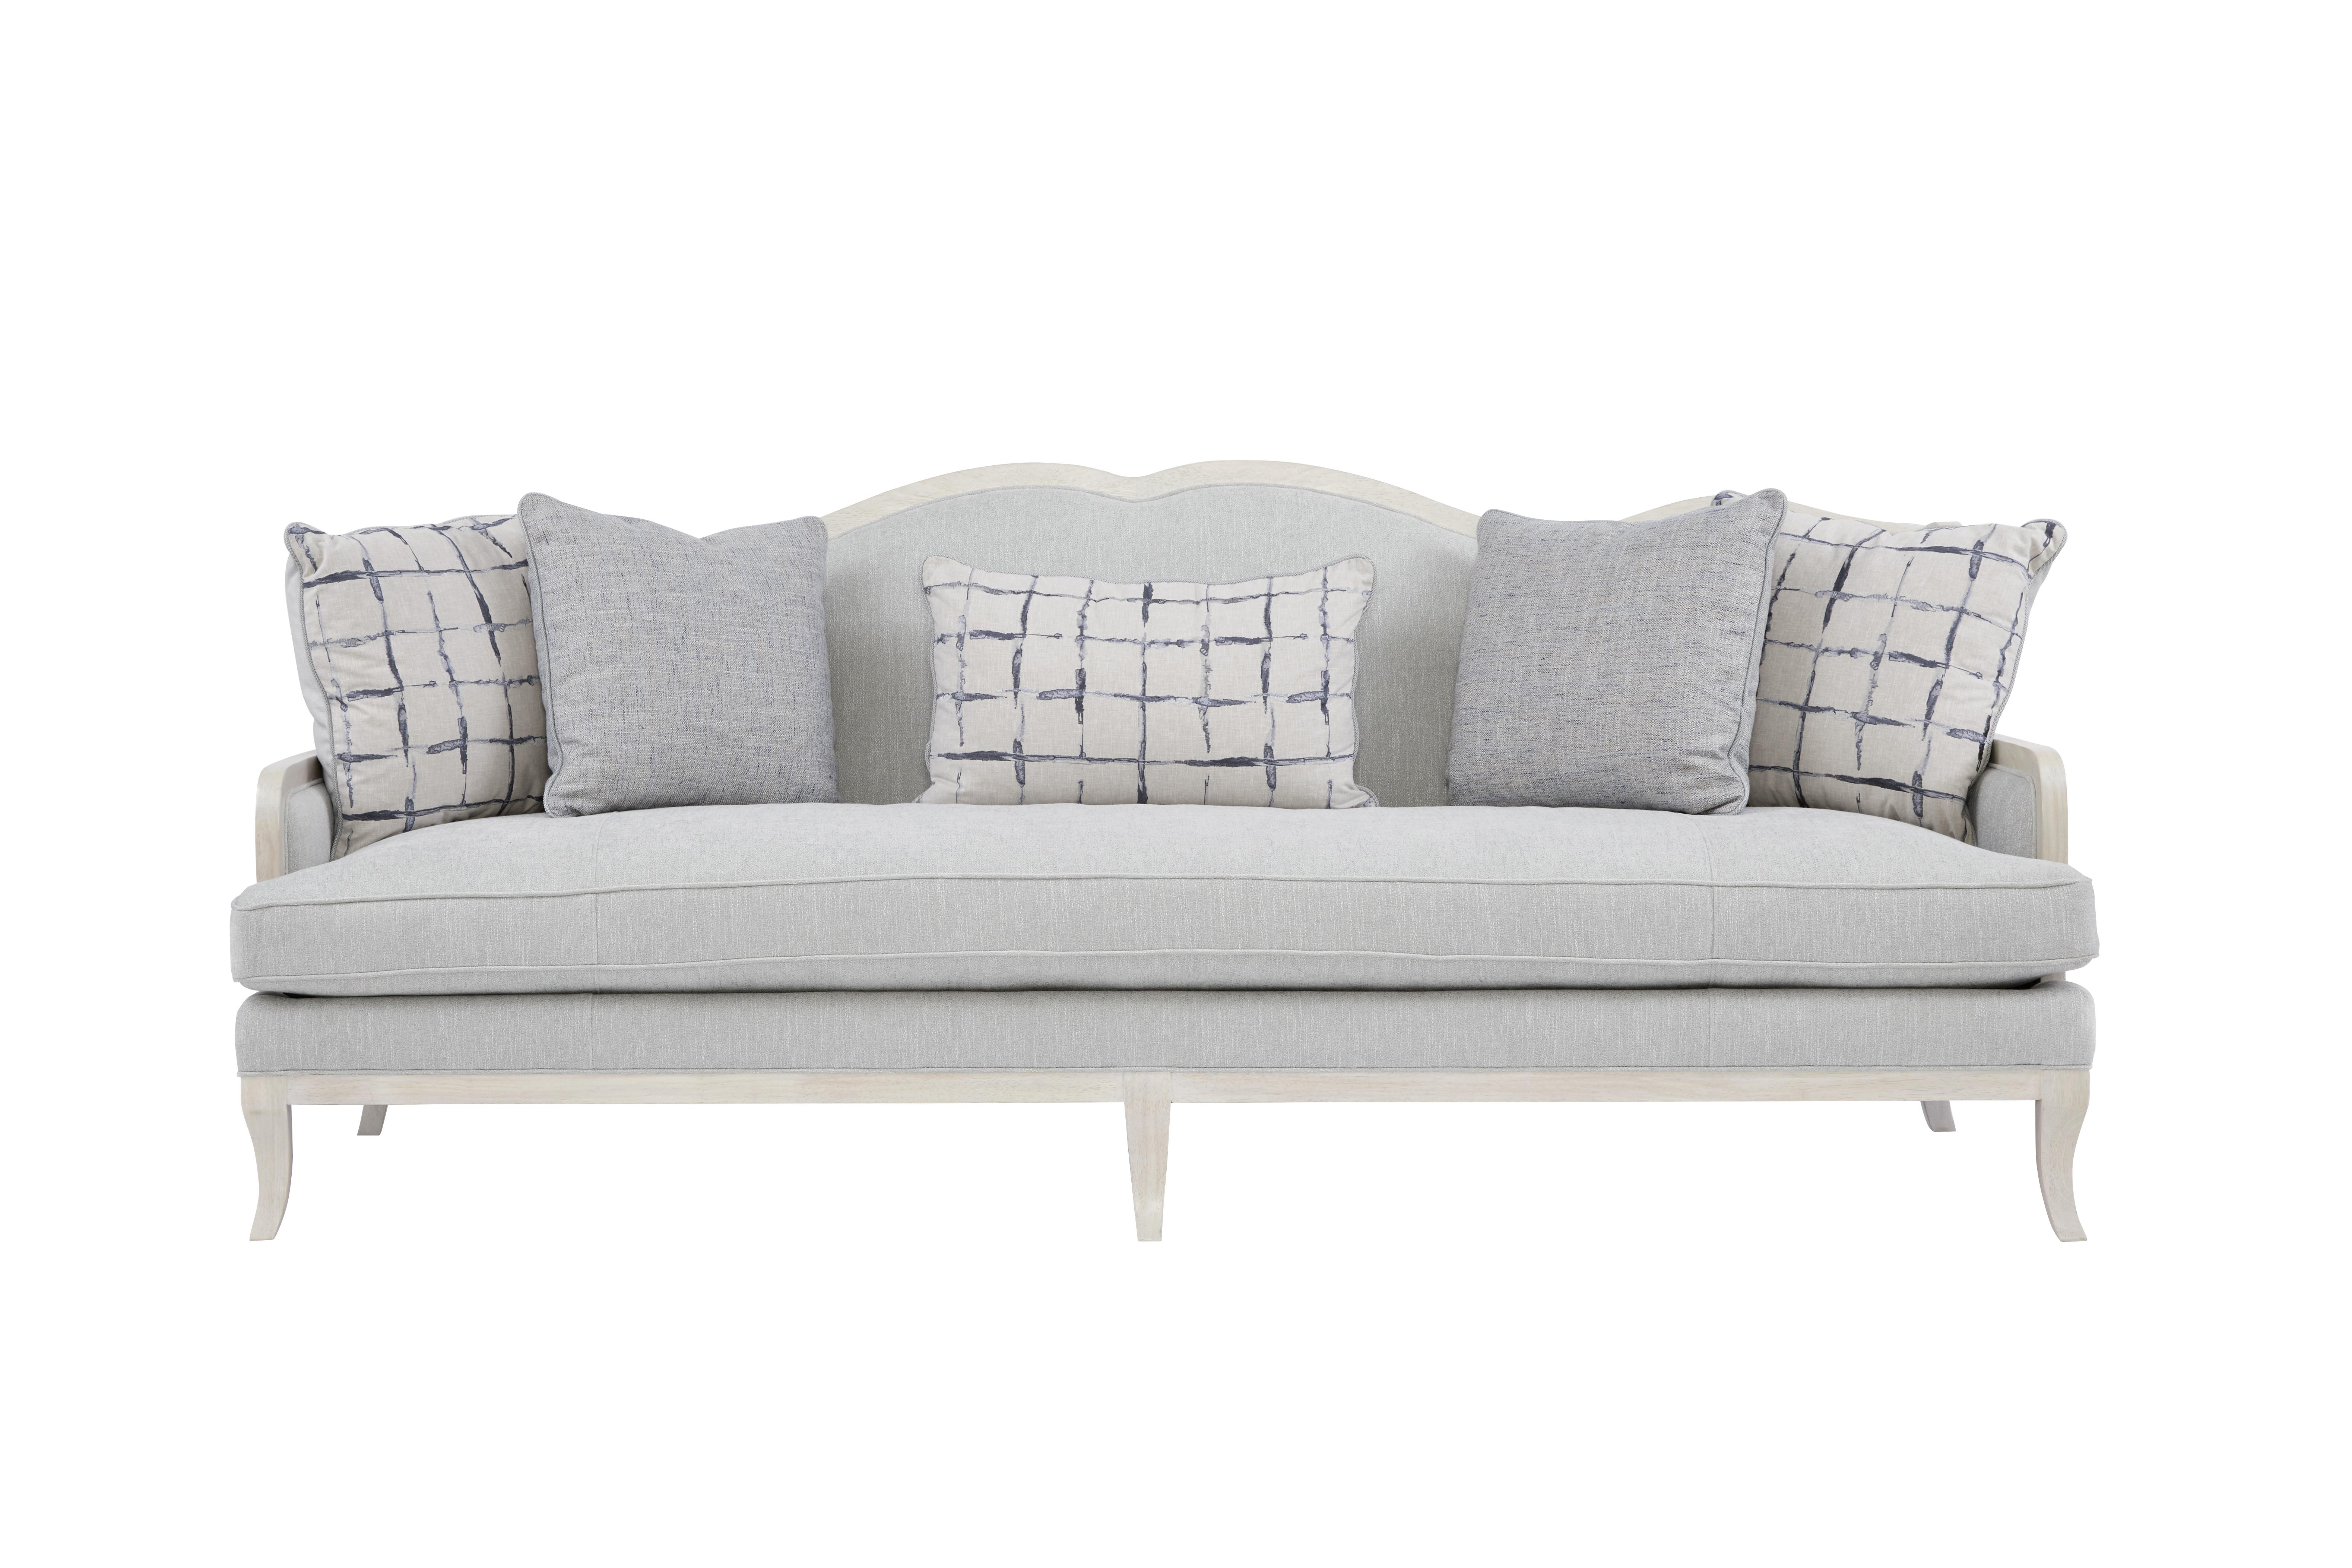 Classic, Traditional Sofa Assemblage 754501-5349AB in Mist Fabric